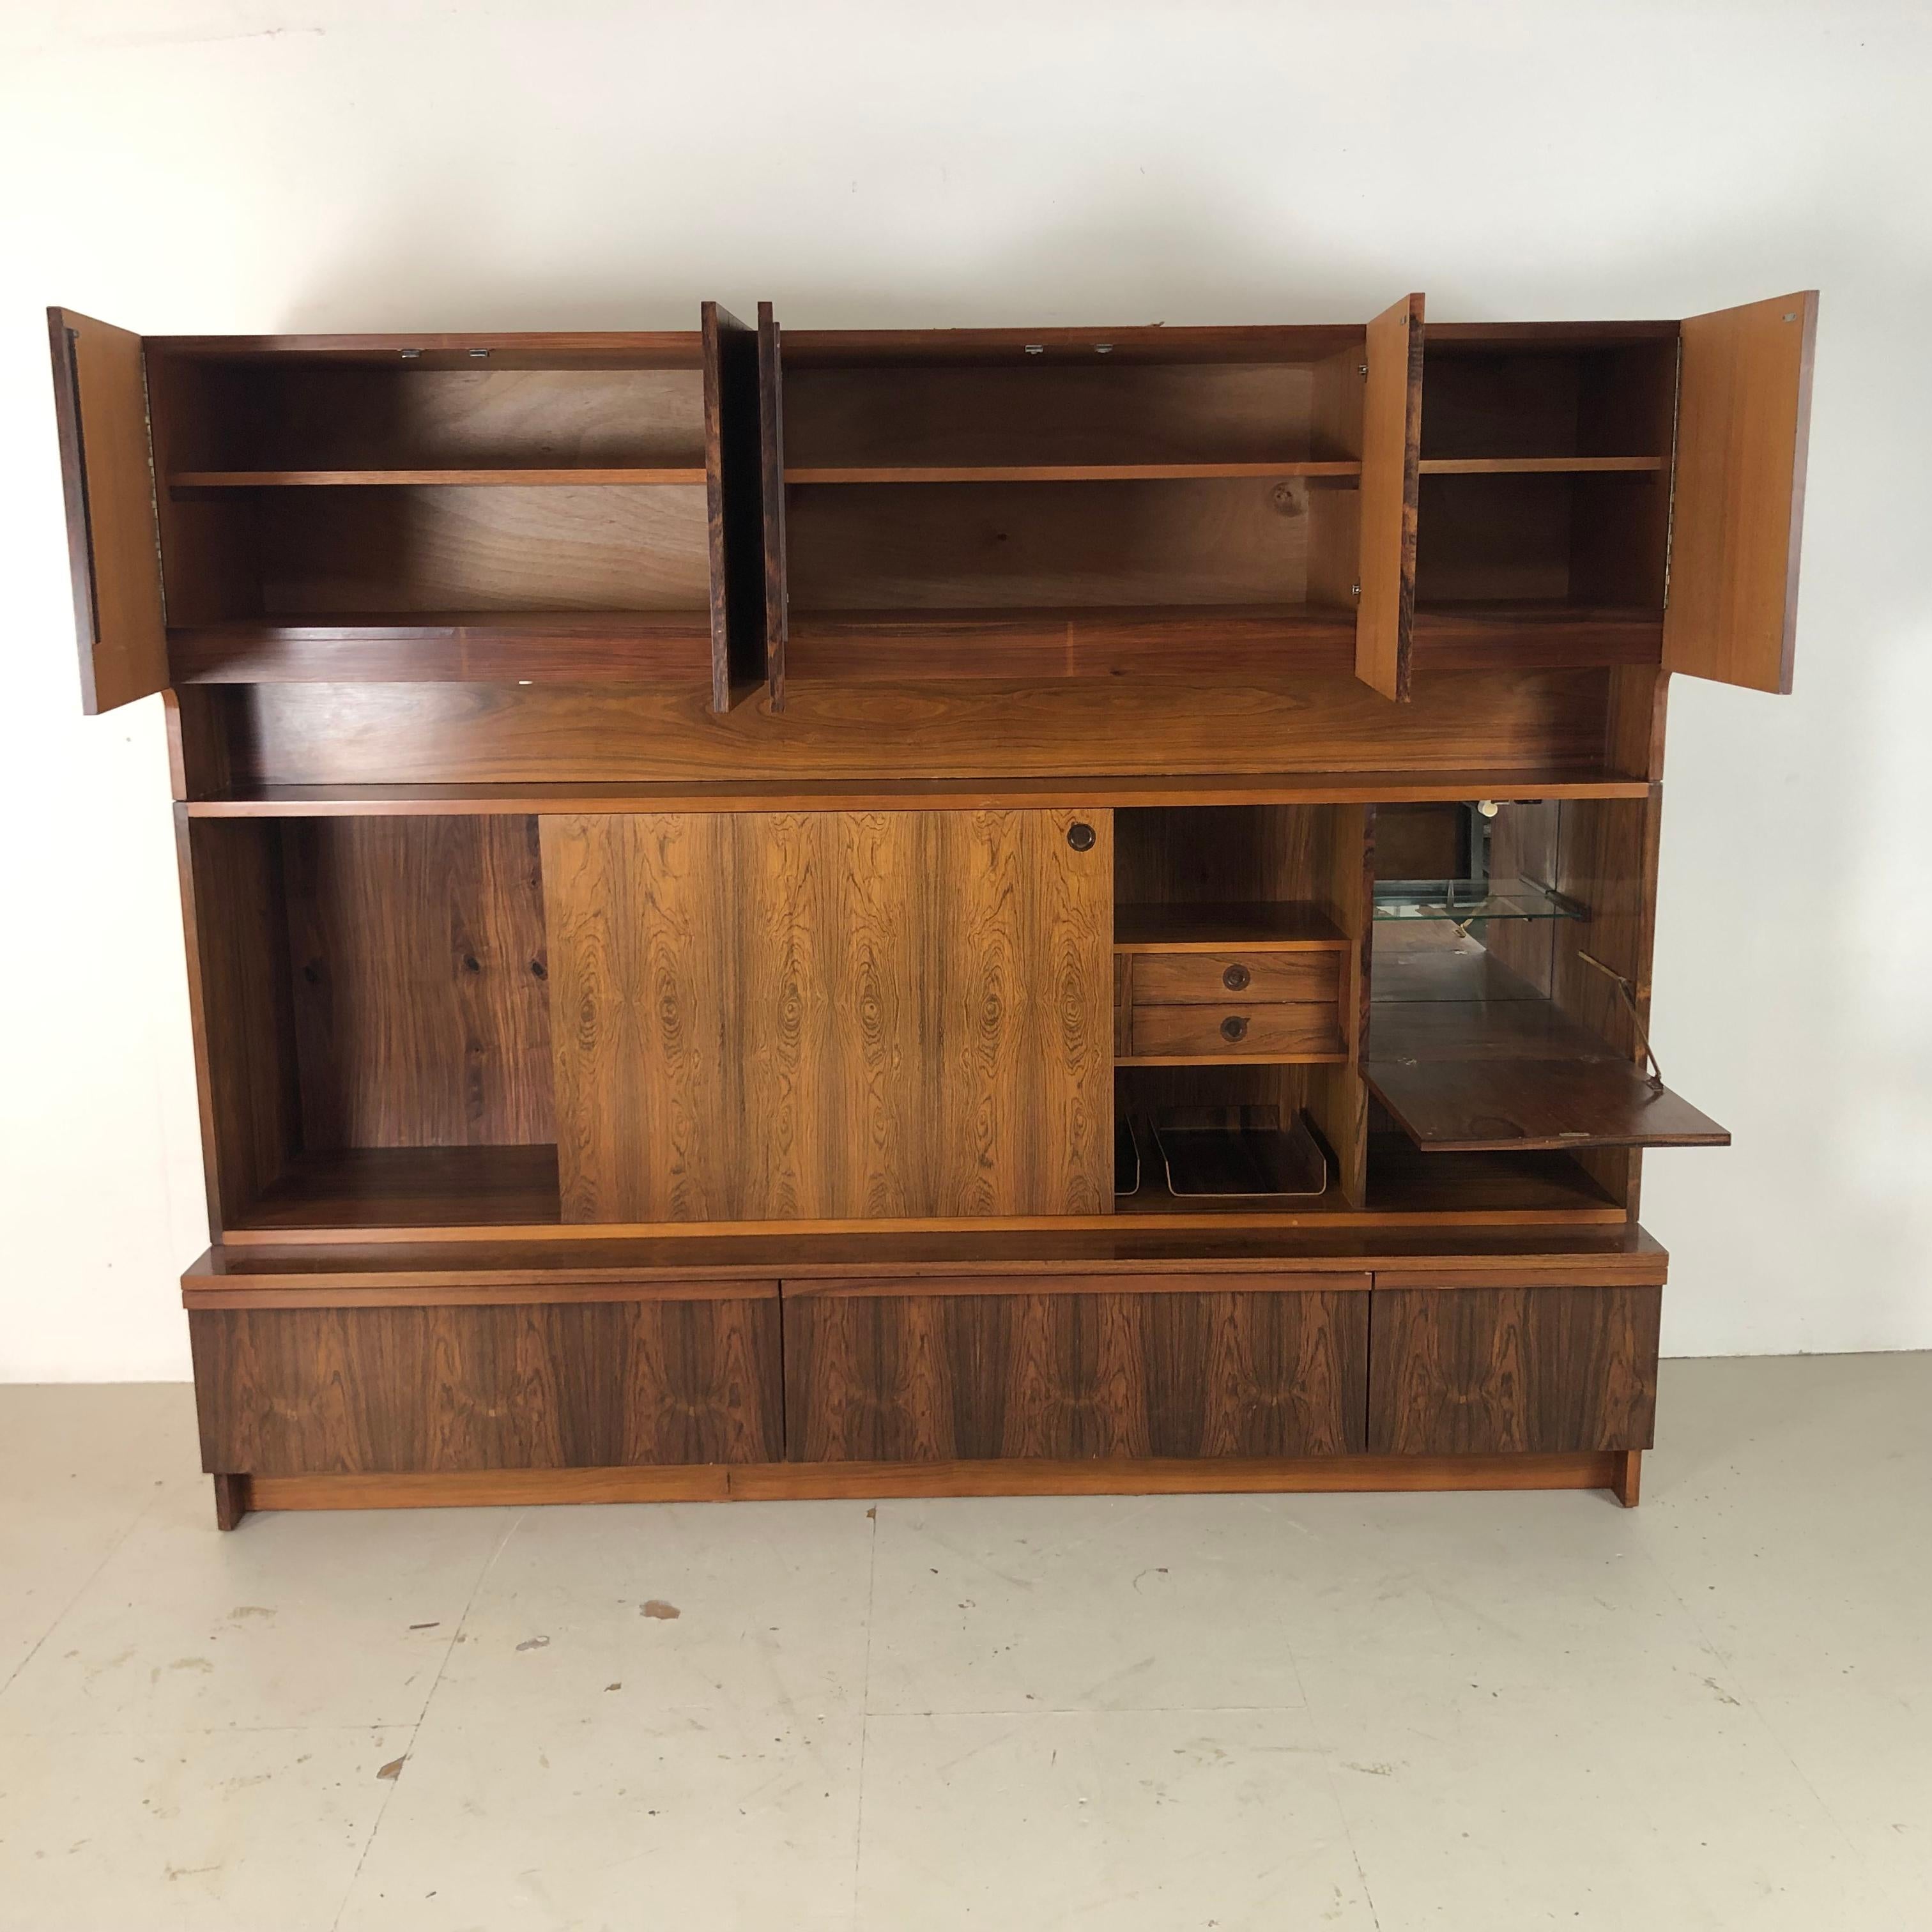 Magnificient rosewood wall unit sold in Heals by Robert Heritage for Archie Shine. Designed by Robert Heritage in 1957 and produced by Archie Shine, it has been fully polished and is in excellent condition.

It splits into 3 horizontal parts for